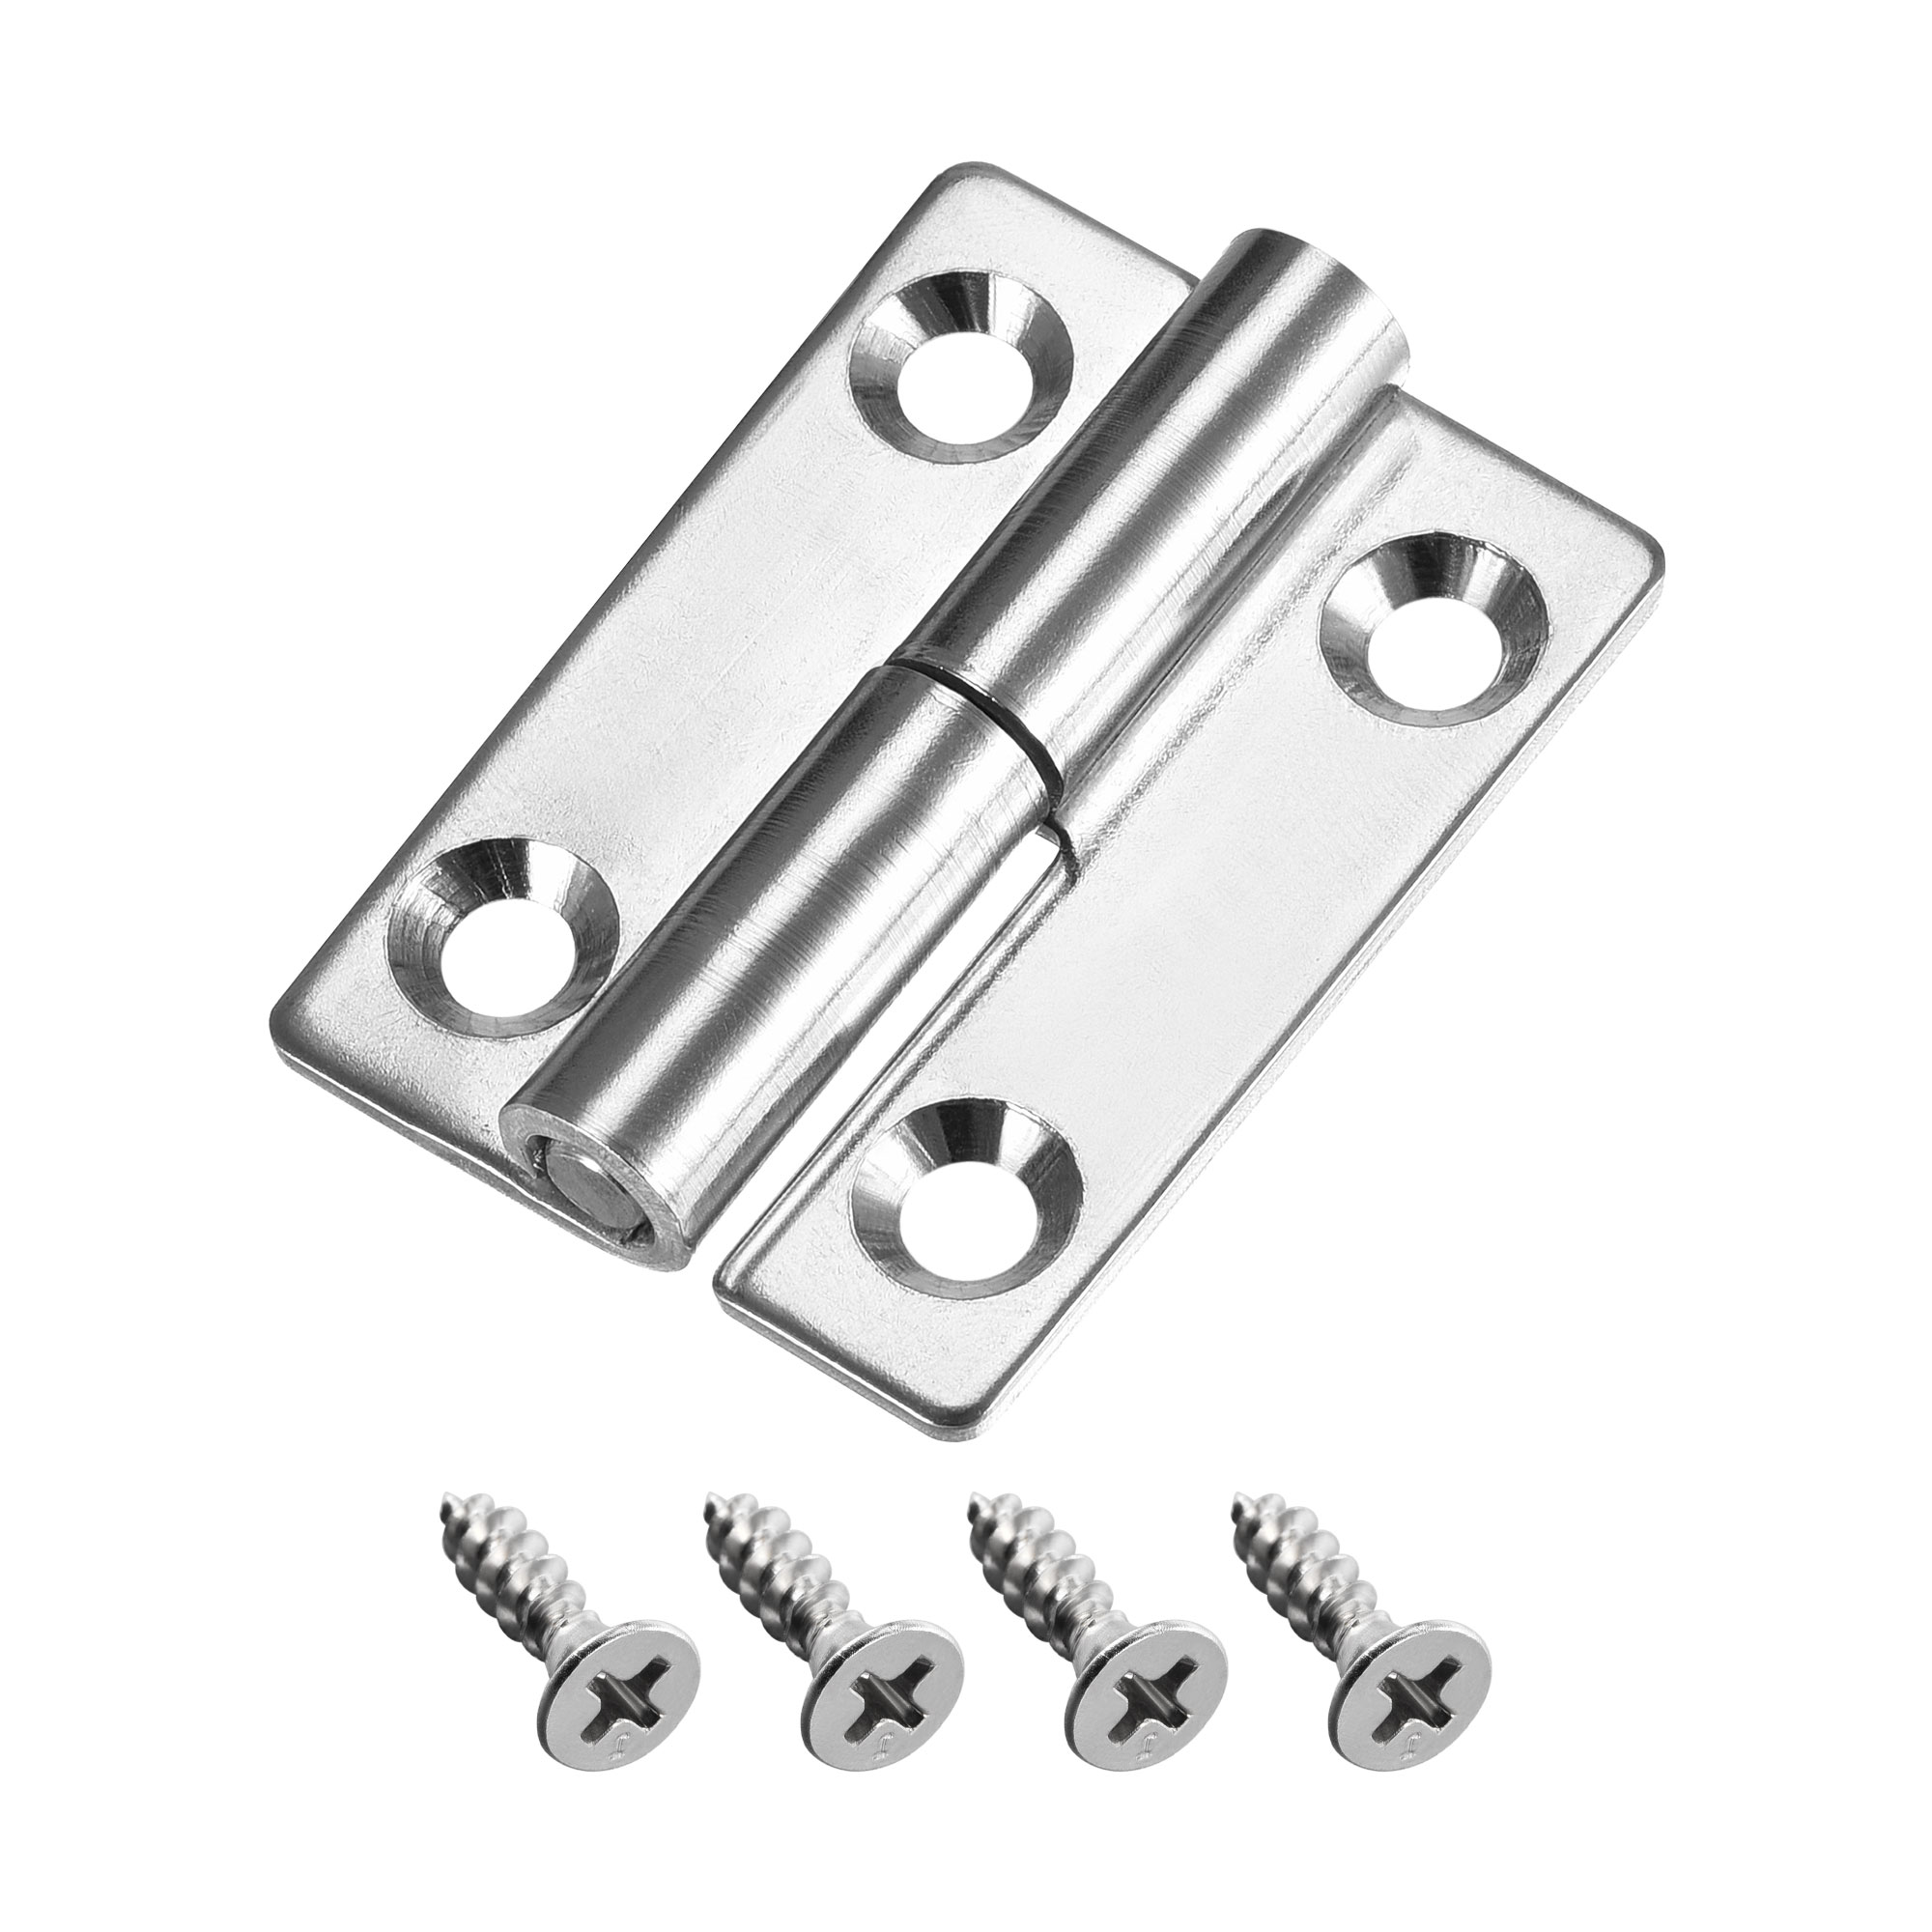 Small Slip Joint Flag Hinges WiMas 10PCS 3Inch Stainless Steel Flag Hinges Home Furniture Hardware Hinges with 60PCS Screws Lift Off Left Handed Detachable Door Hinges